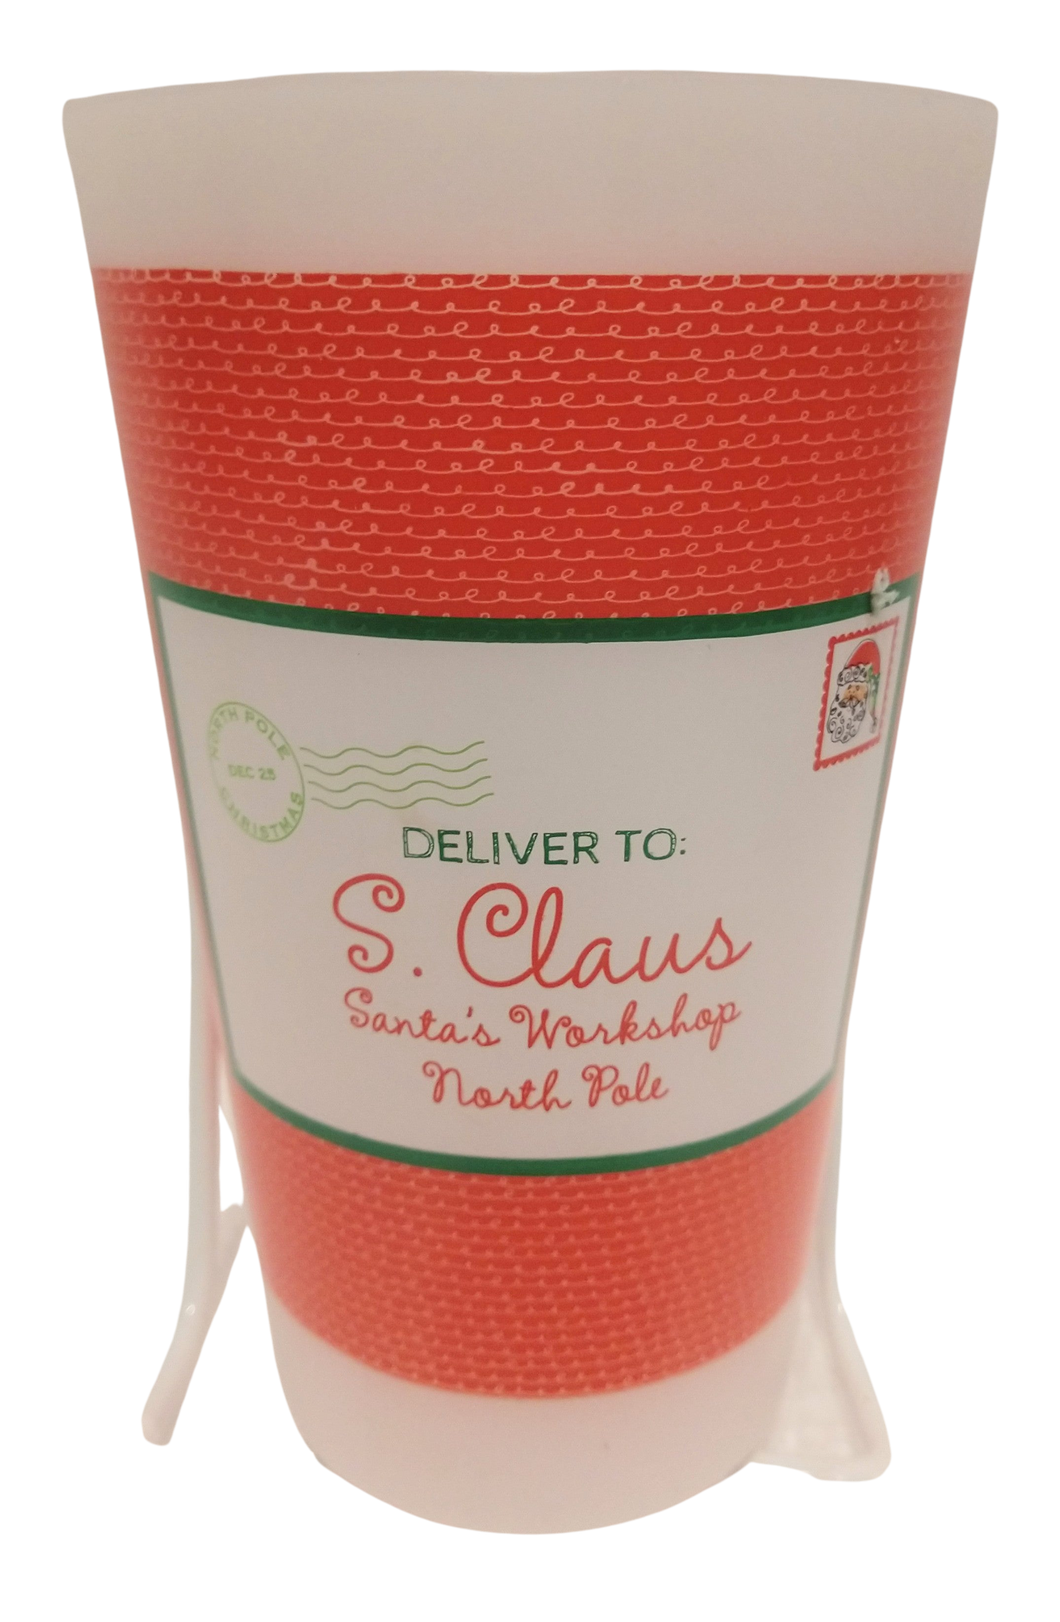 Large Plastic 16 ounce Drinking Cup Deliver to S. Claus